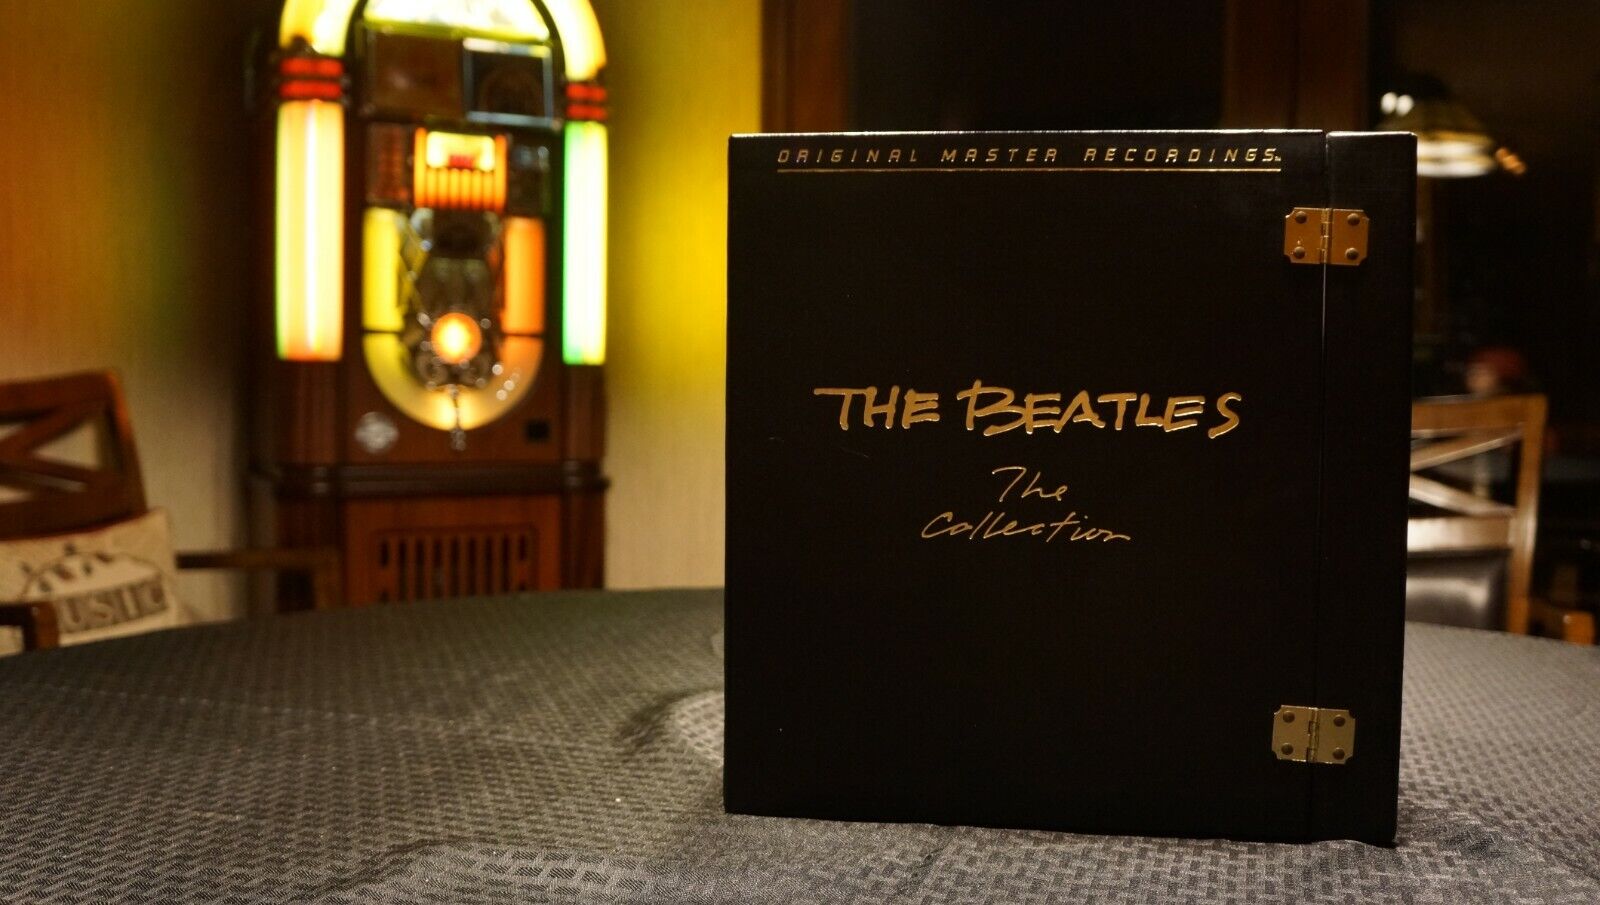 The Beatles   The Collection   MFSL   Never Played   Serial #10057